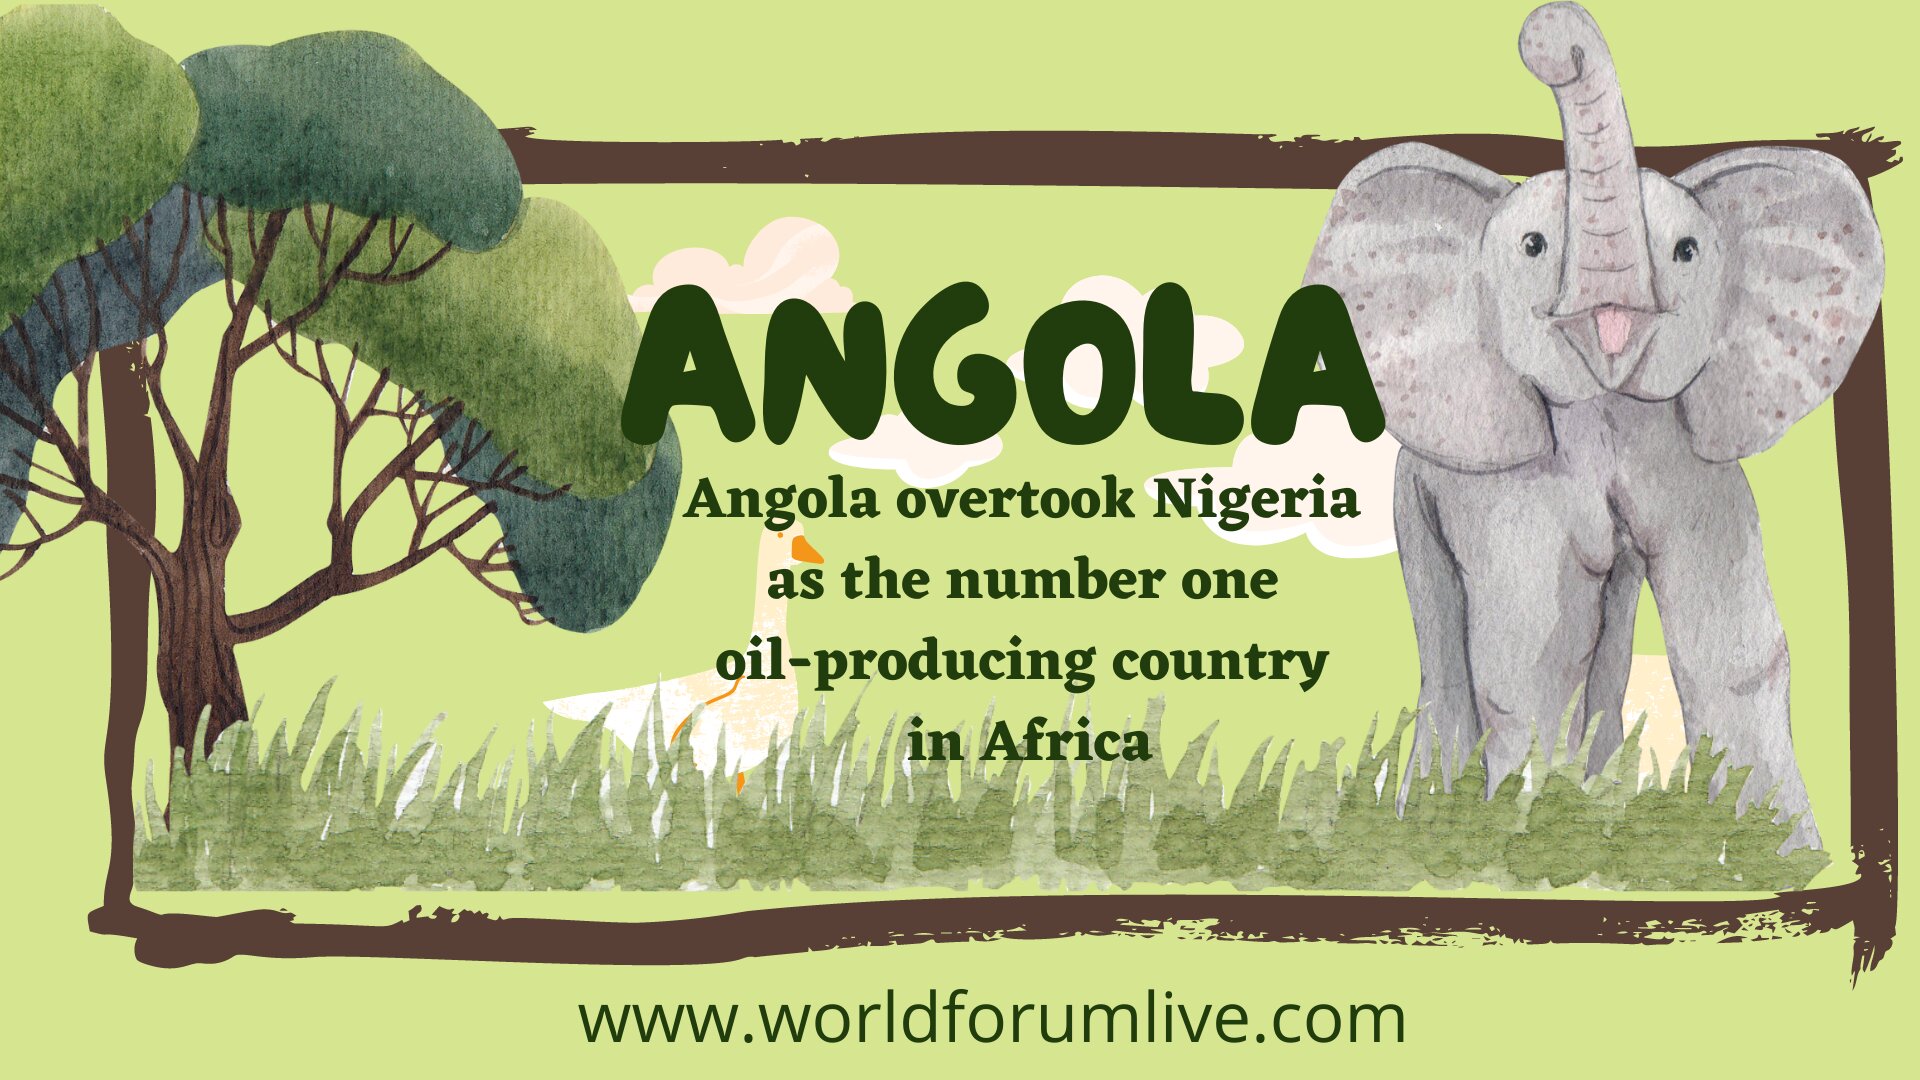 Angola overtook Nigeria as the number one oil-producing country in Africa.jpg